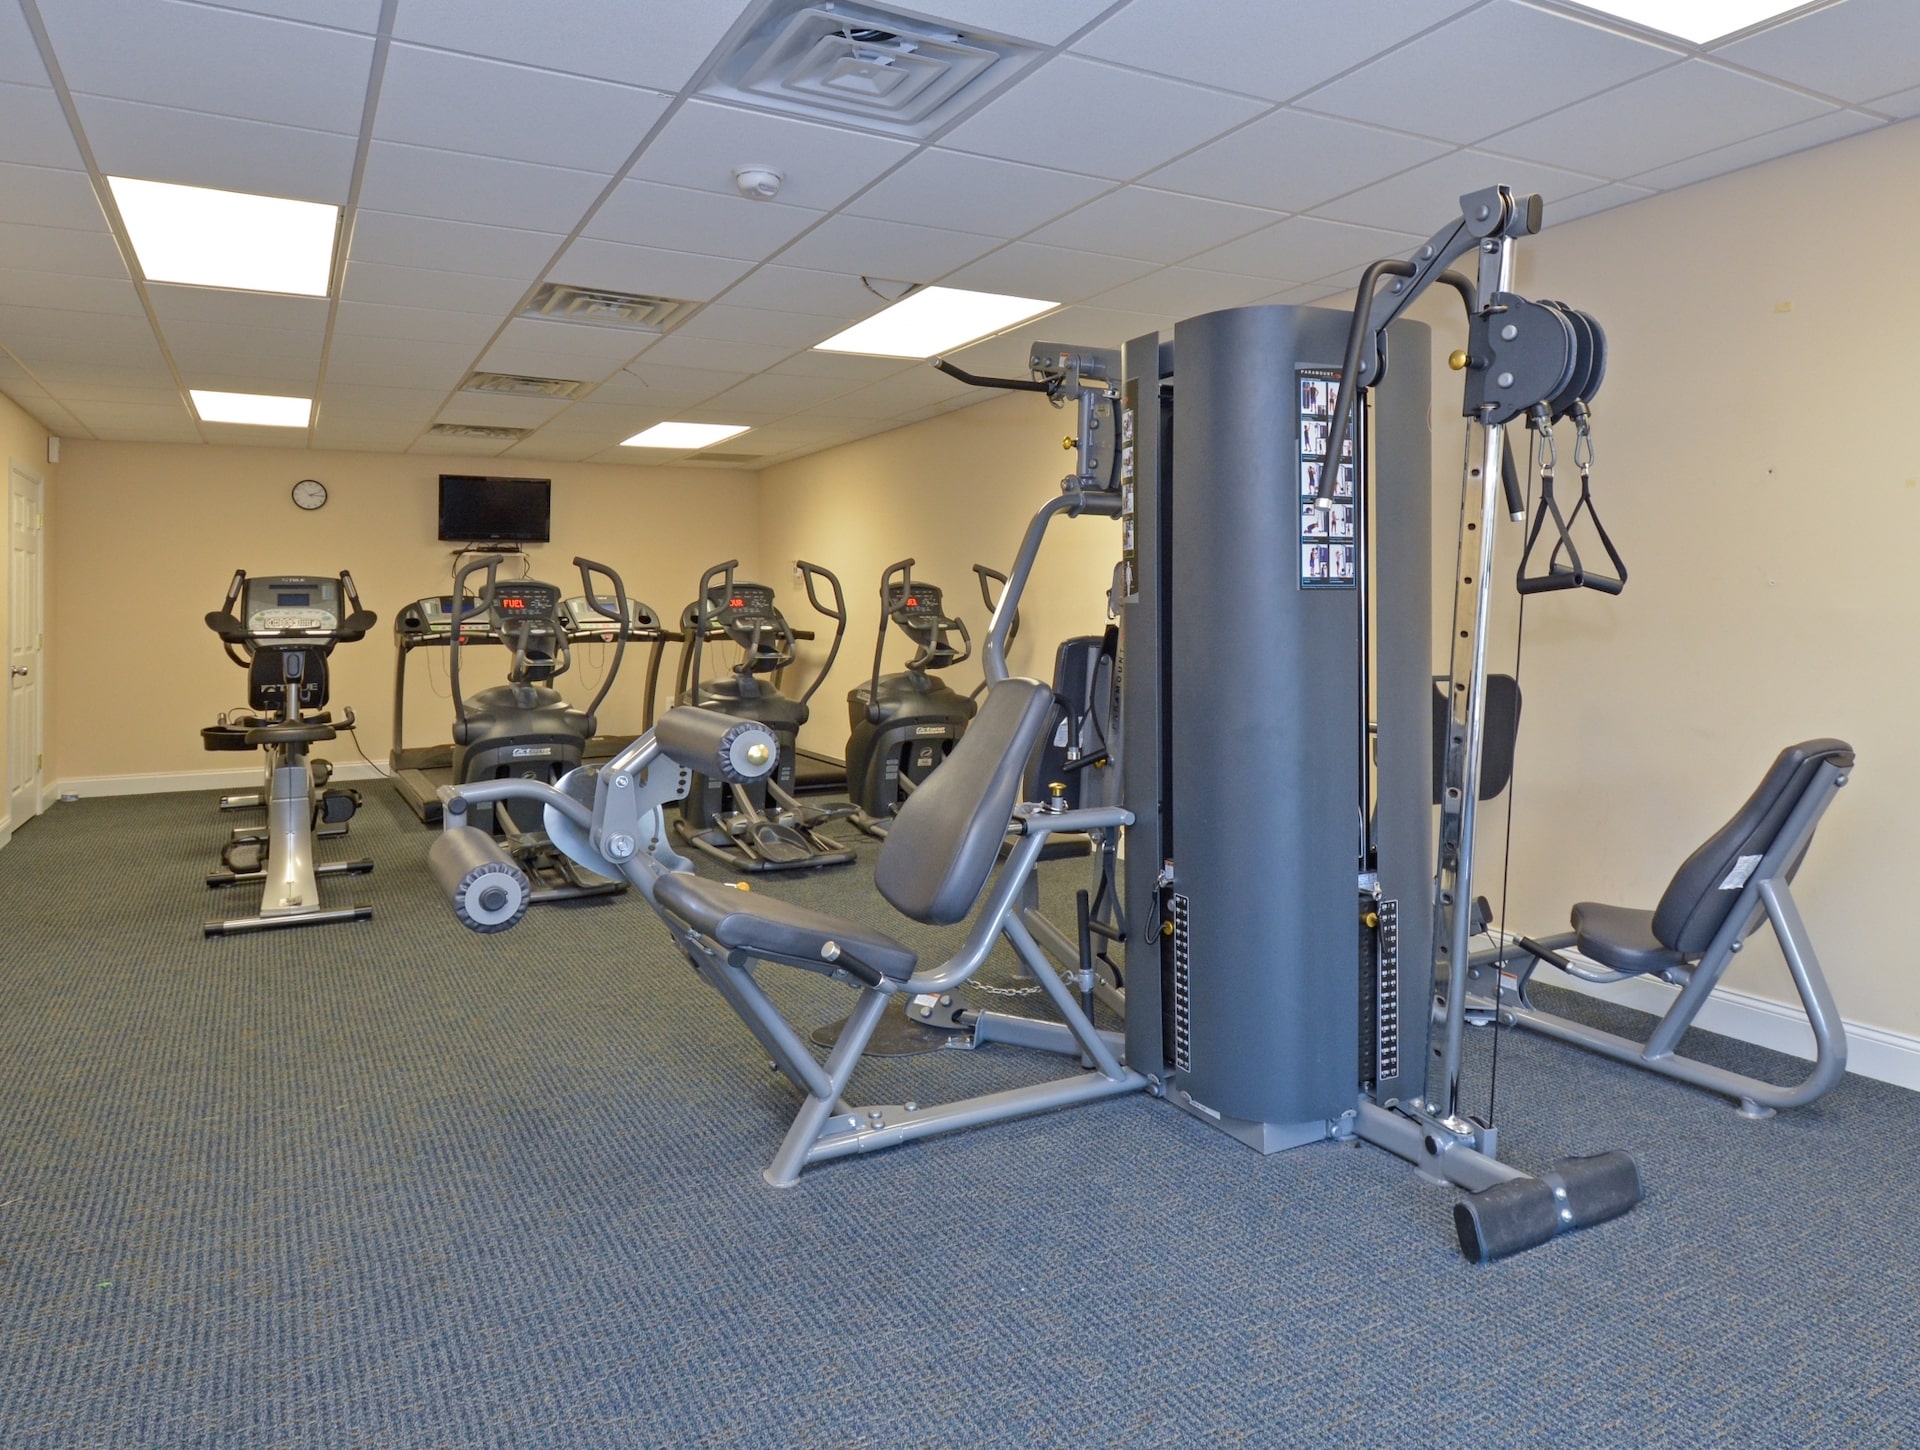 Fitness center area of our community, fitted with fitness equipment, and soft flooring